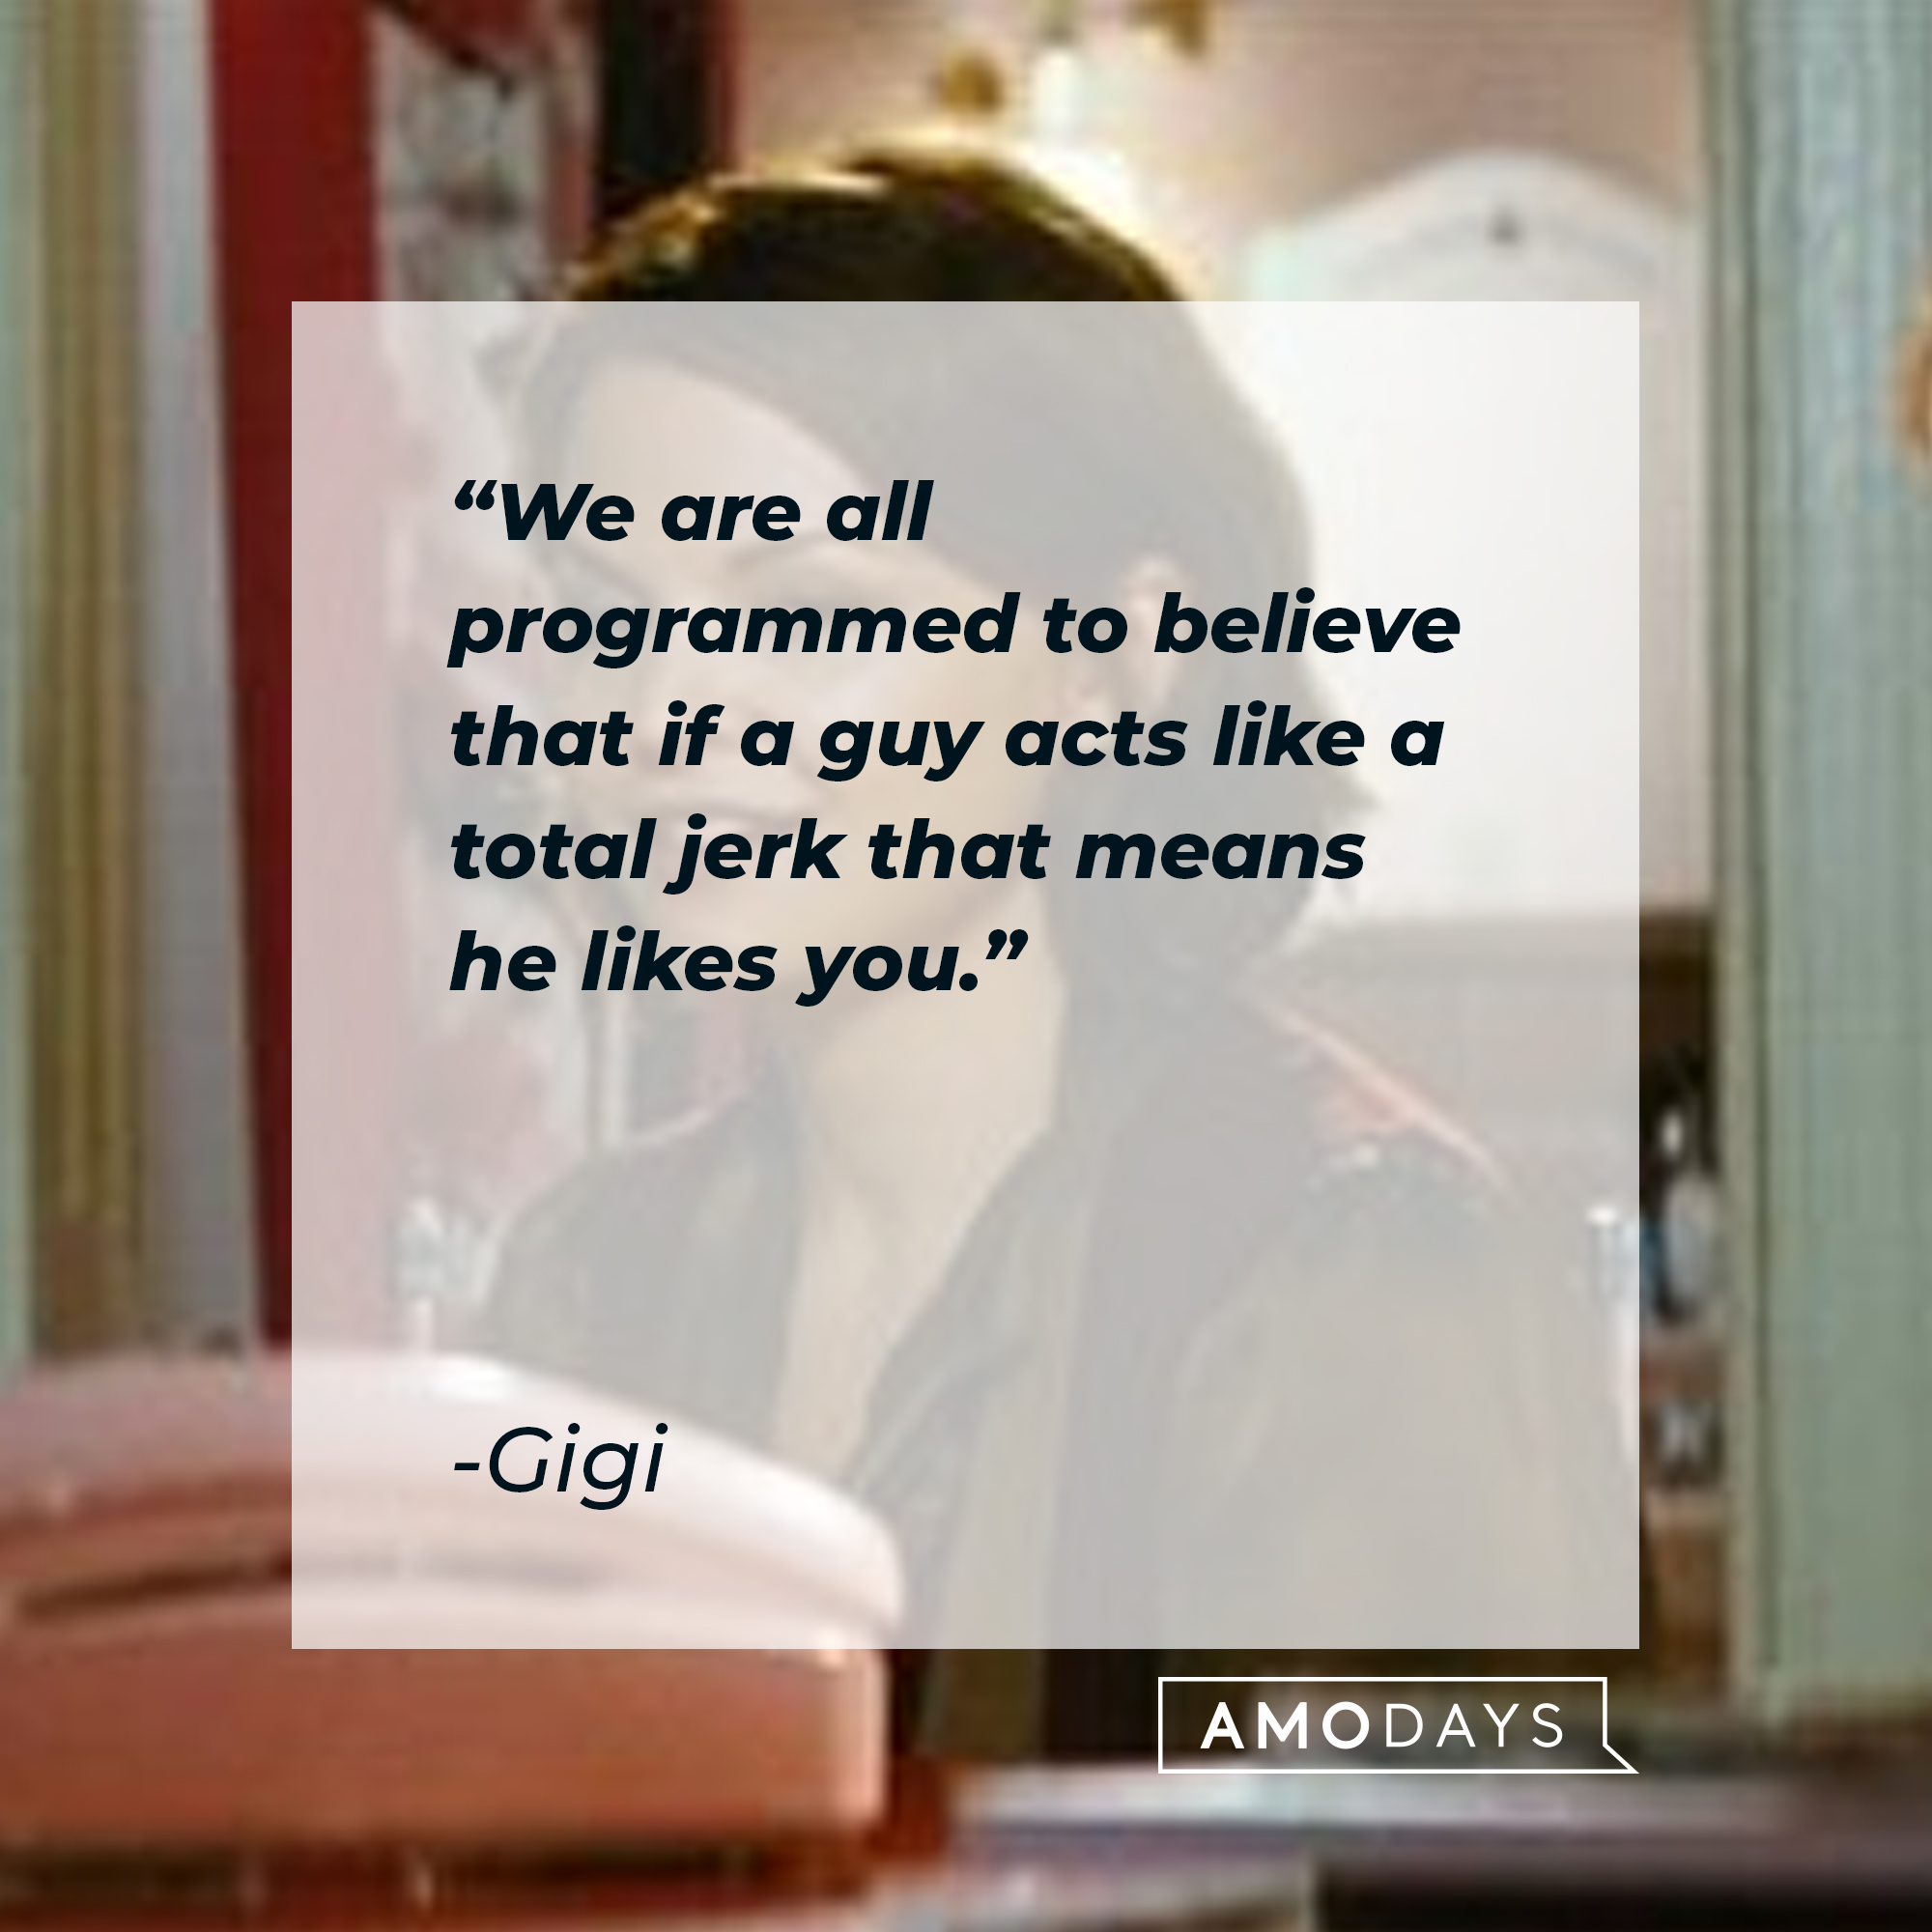 Gigi's quote: "We are all programmed to believe that if a guy acts like a total jerk that means he likes you." | Source: Facebook/hesjustnotthatintoyou